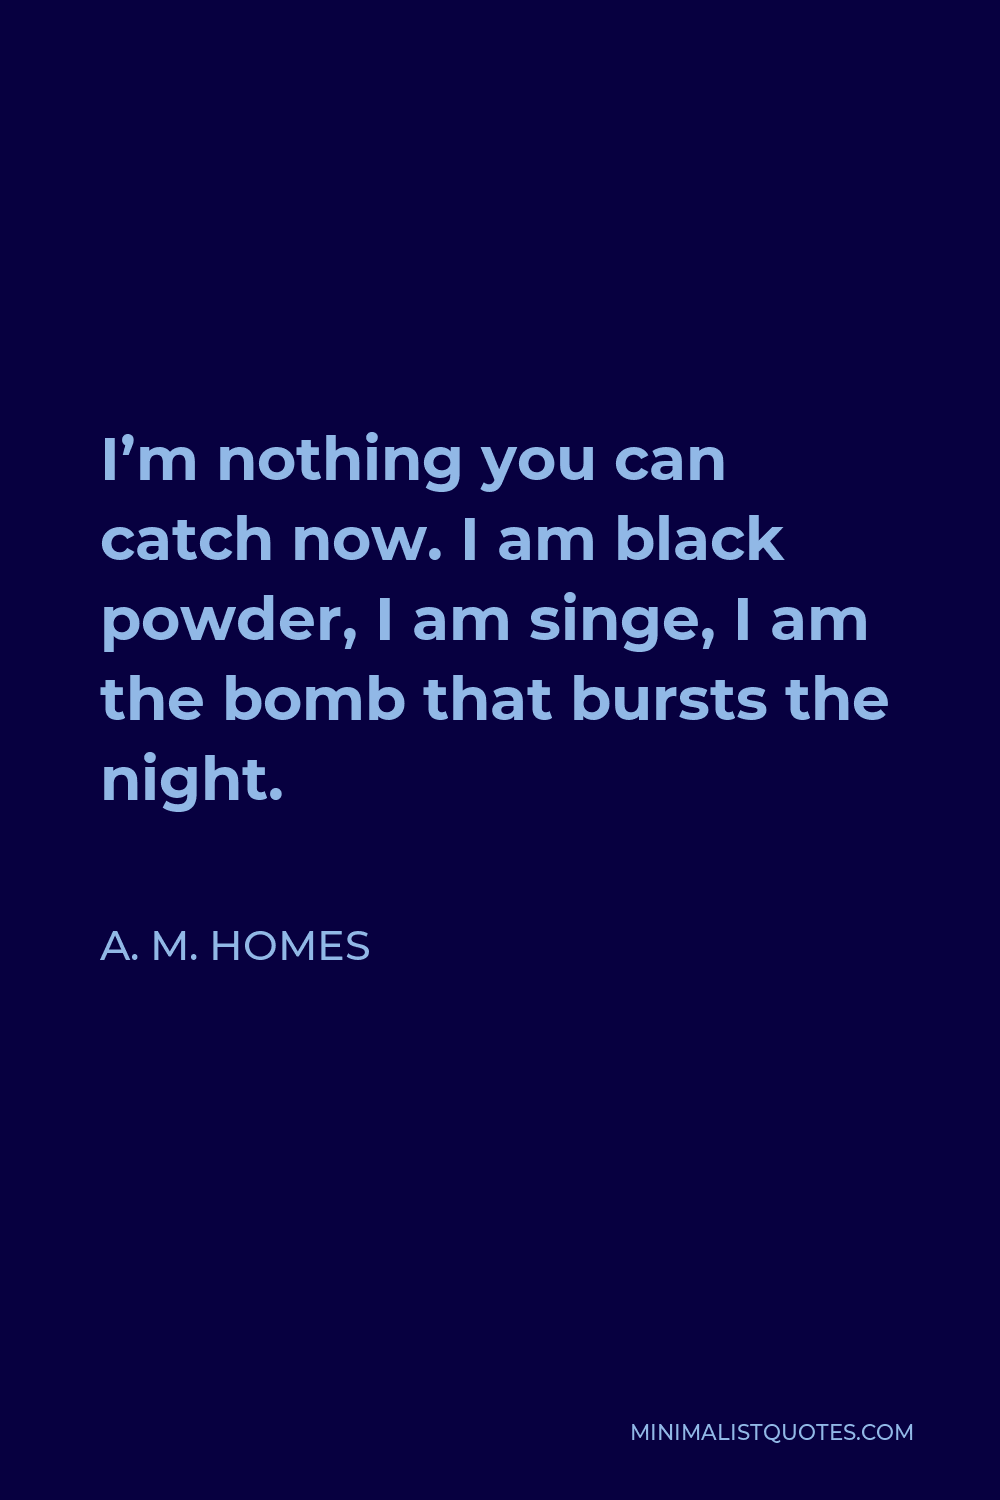 A. M. Homes Quote - I’m nothing you can catch now. I am black powder, I am singe, I am the bomb that bursts the night.